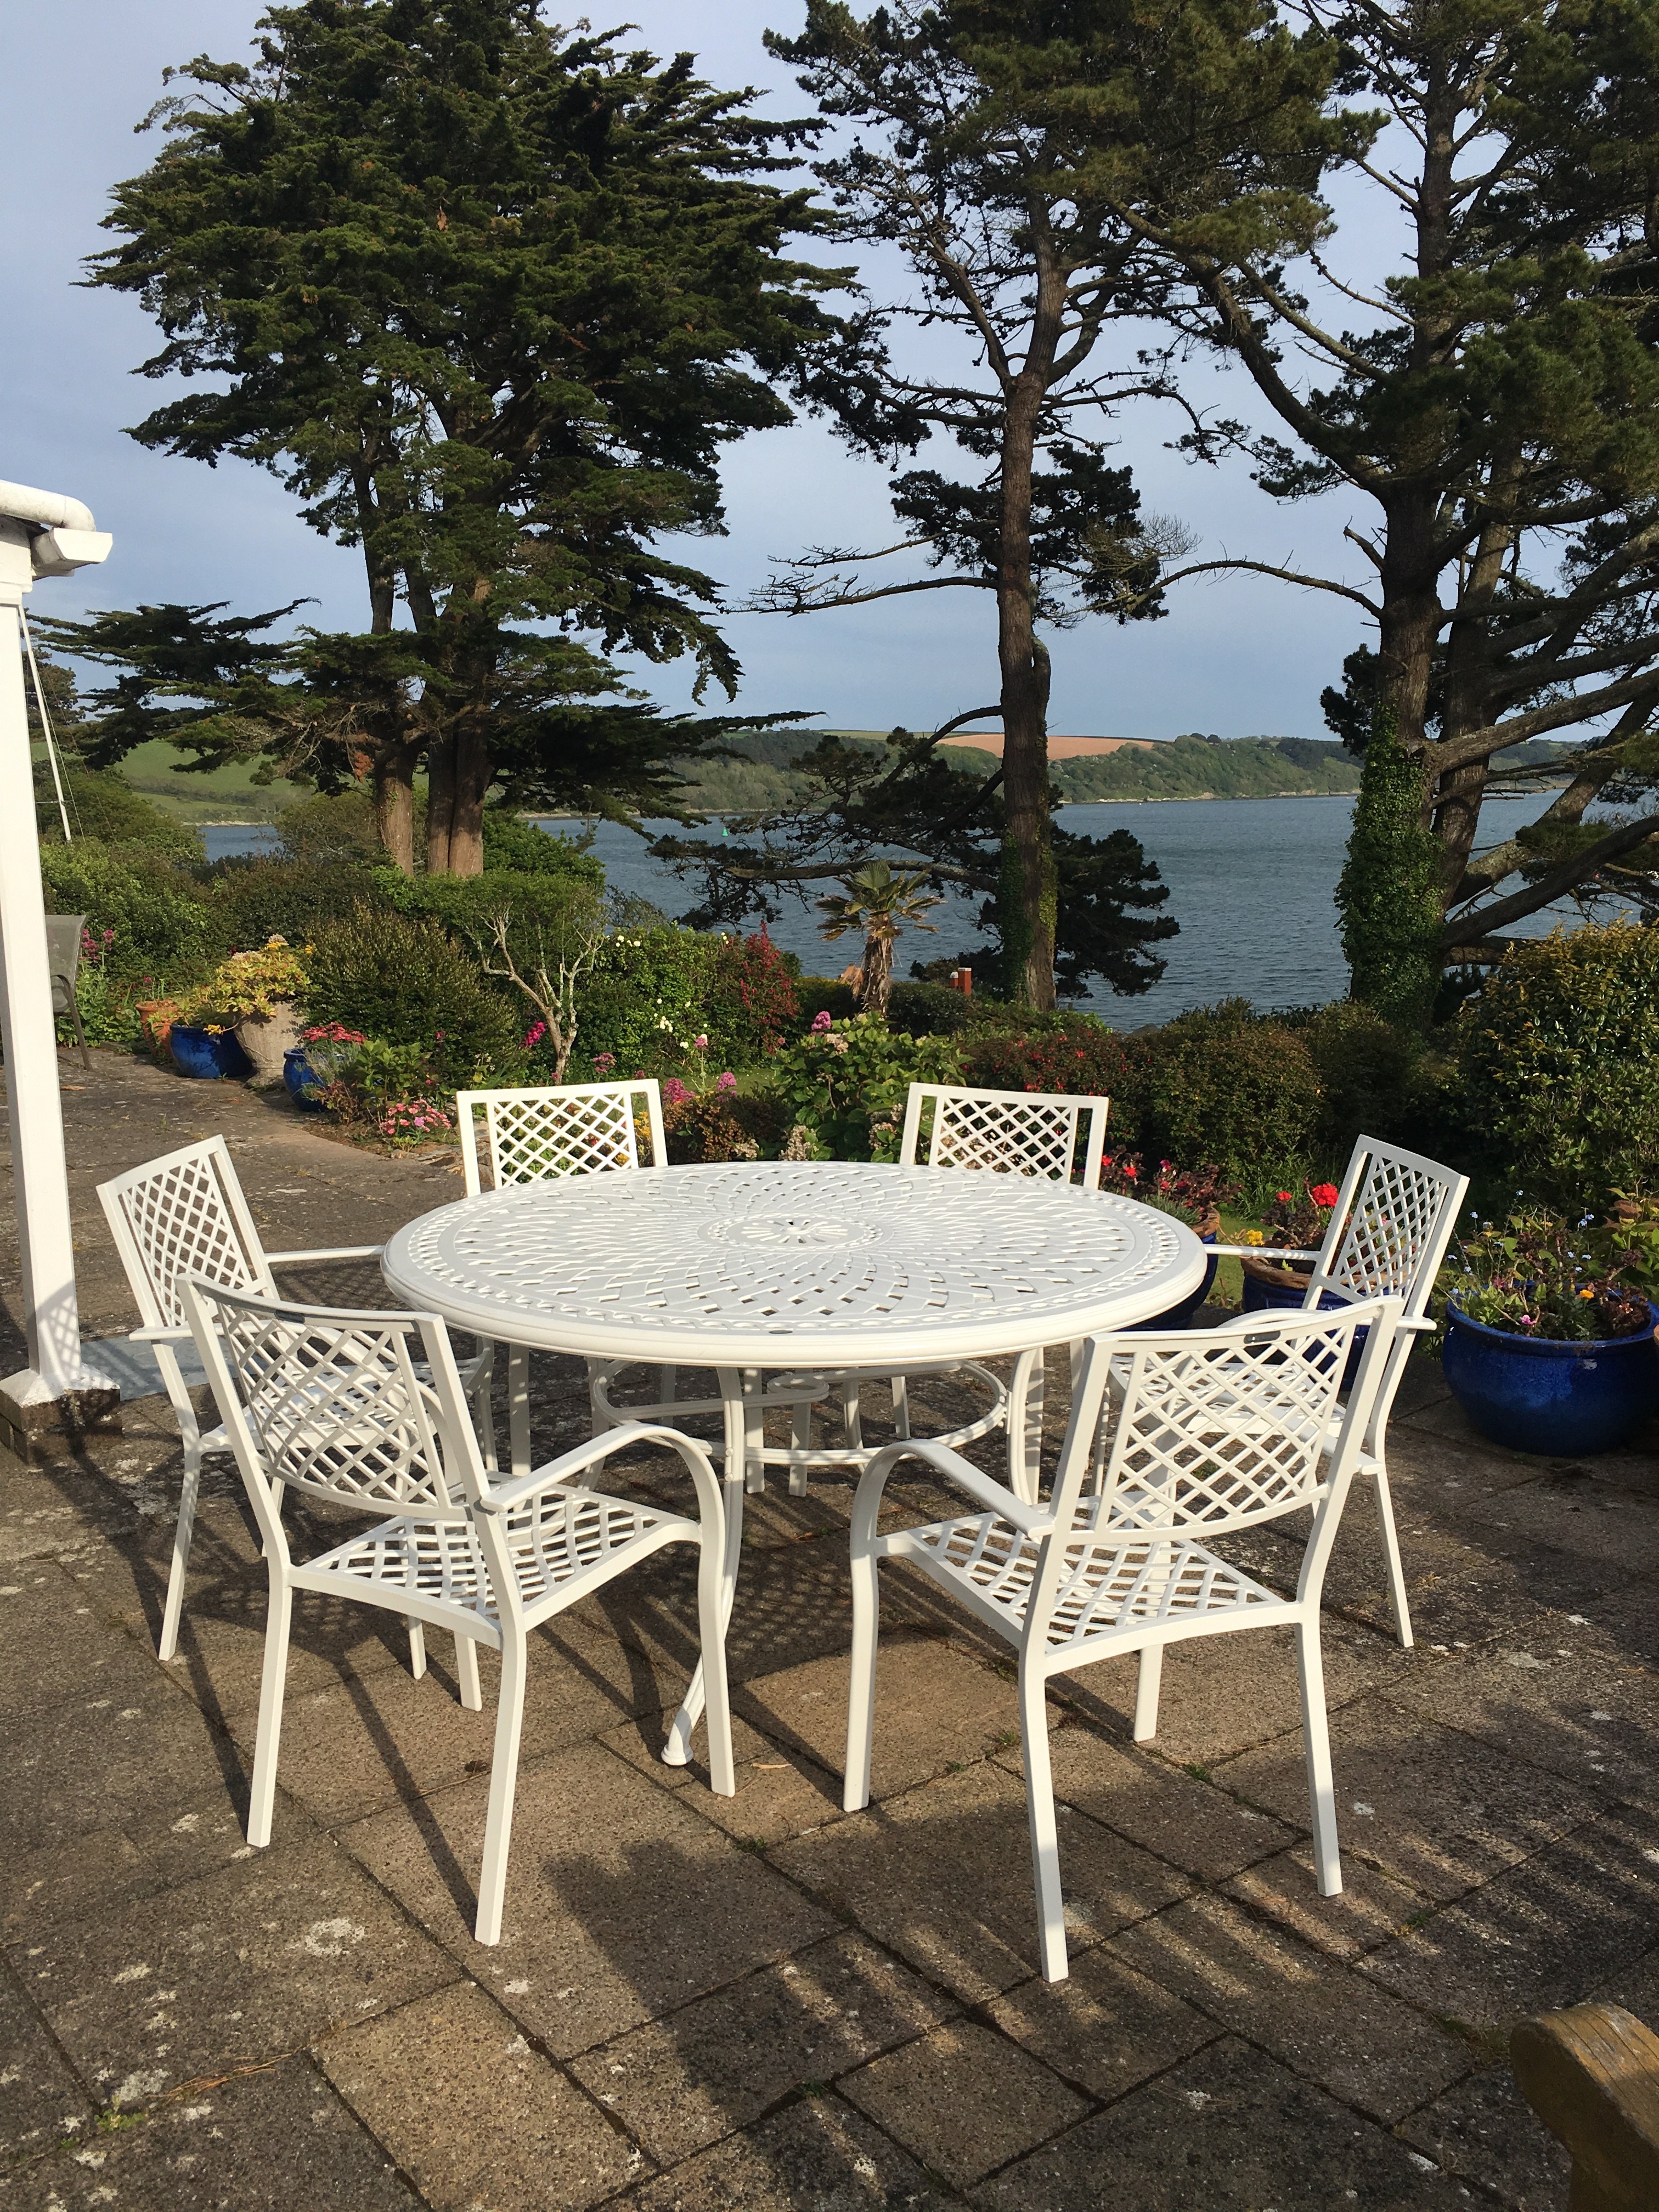 Our final thoughts on how to protect outdoor furniture if you live on the coast...